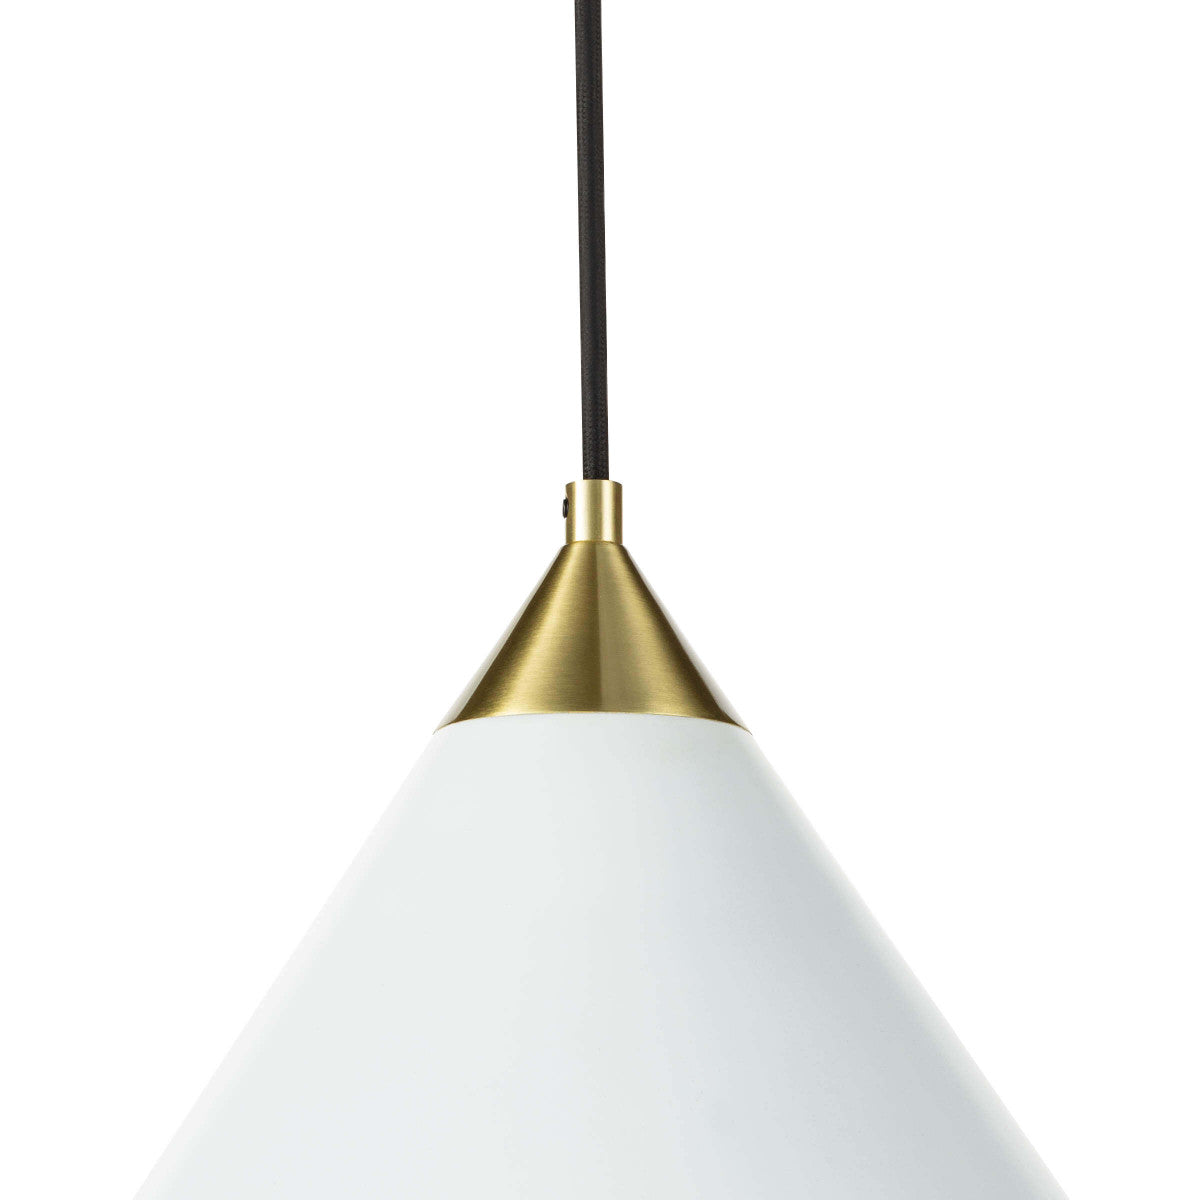 The conical shade of the Hilton White Pendant, matched with the milk glass globe creates a subtle glow and elegant, modern pendant. Perfect for over a kitchen island or sink.   Size: 11.75"w x 11.75"d x 12"h Material: Iron